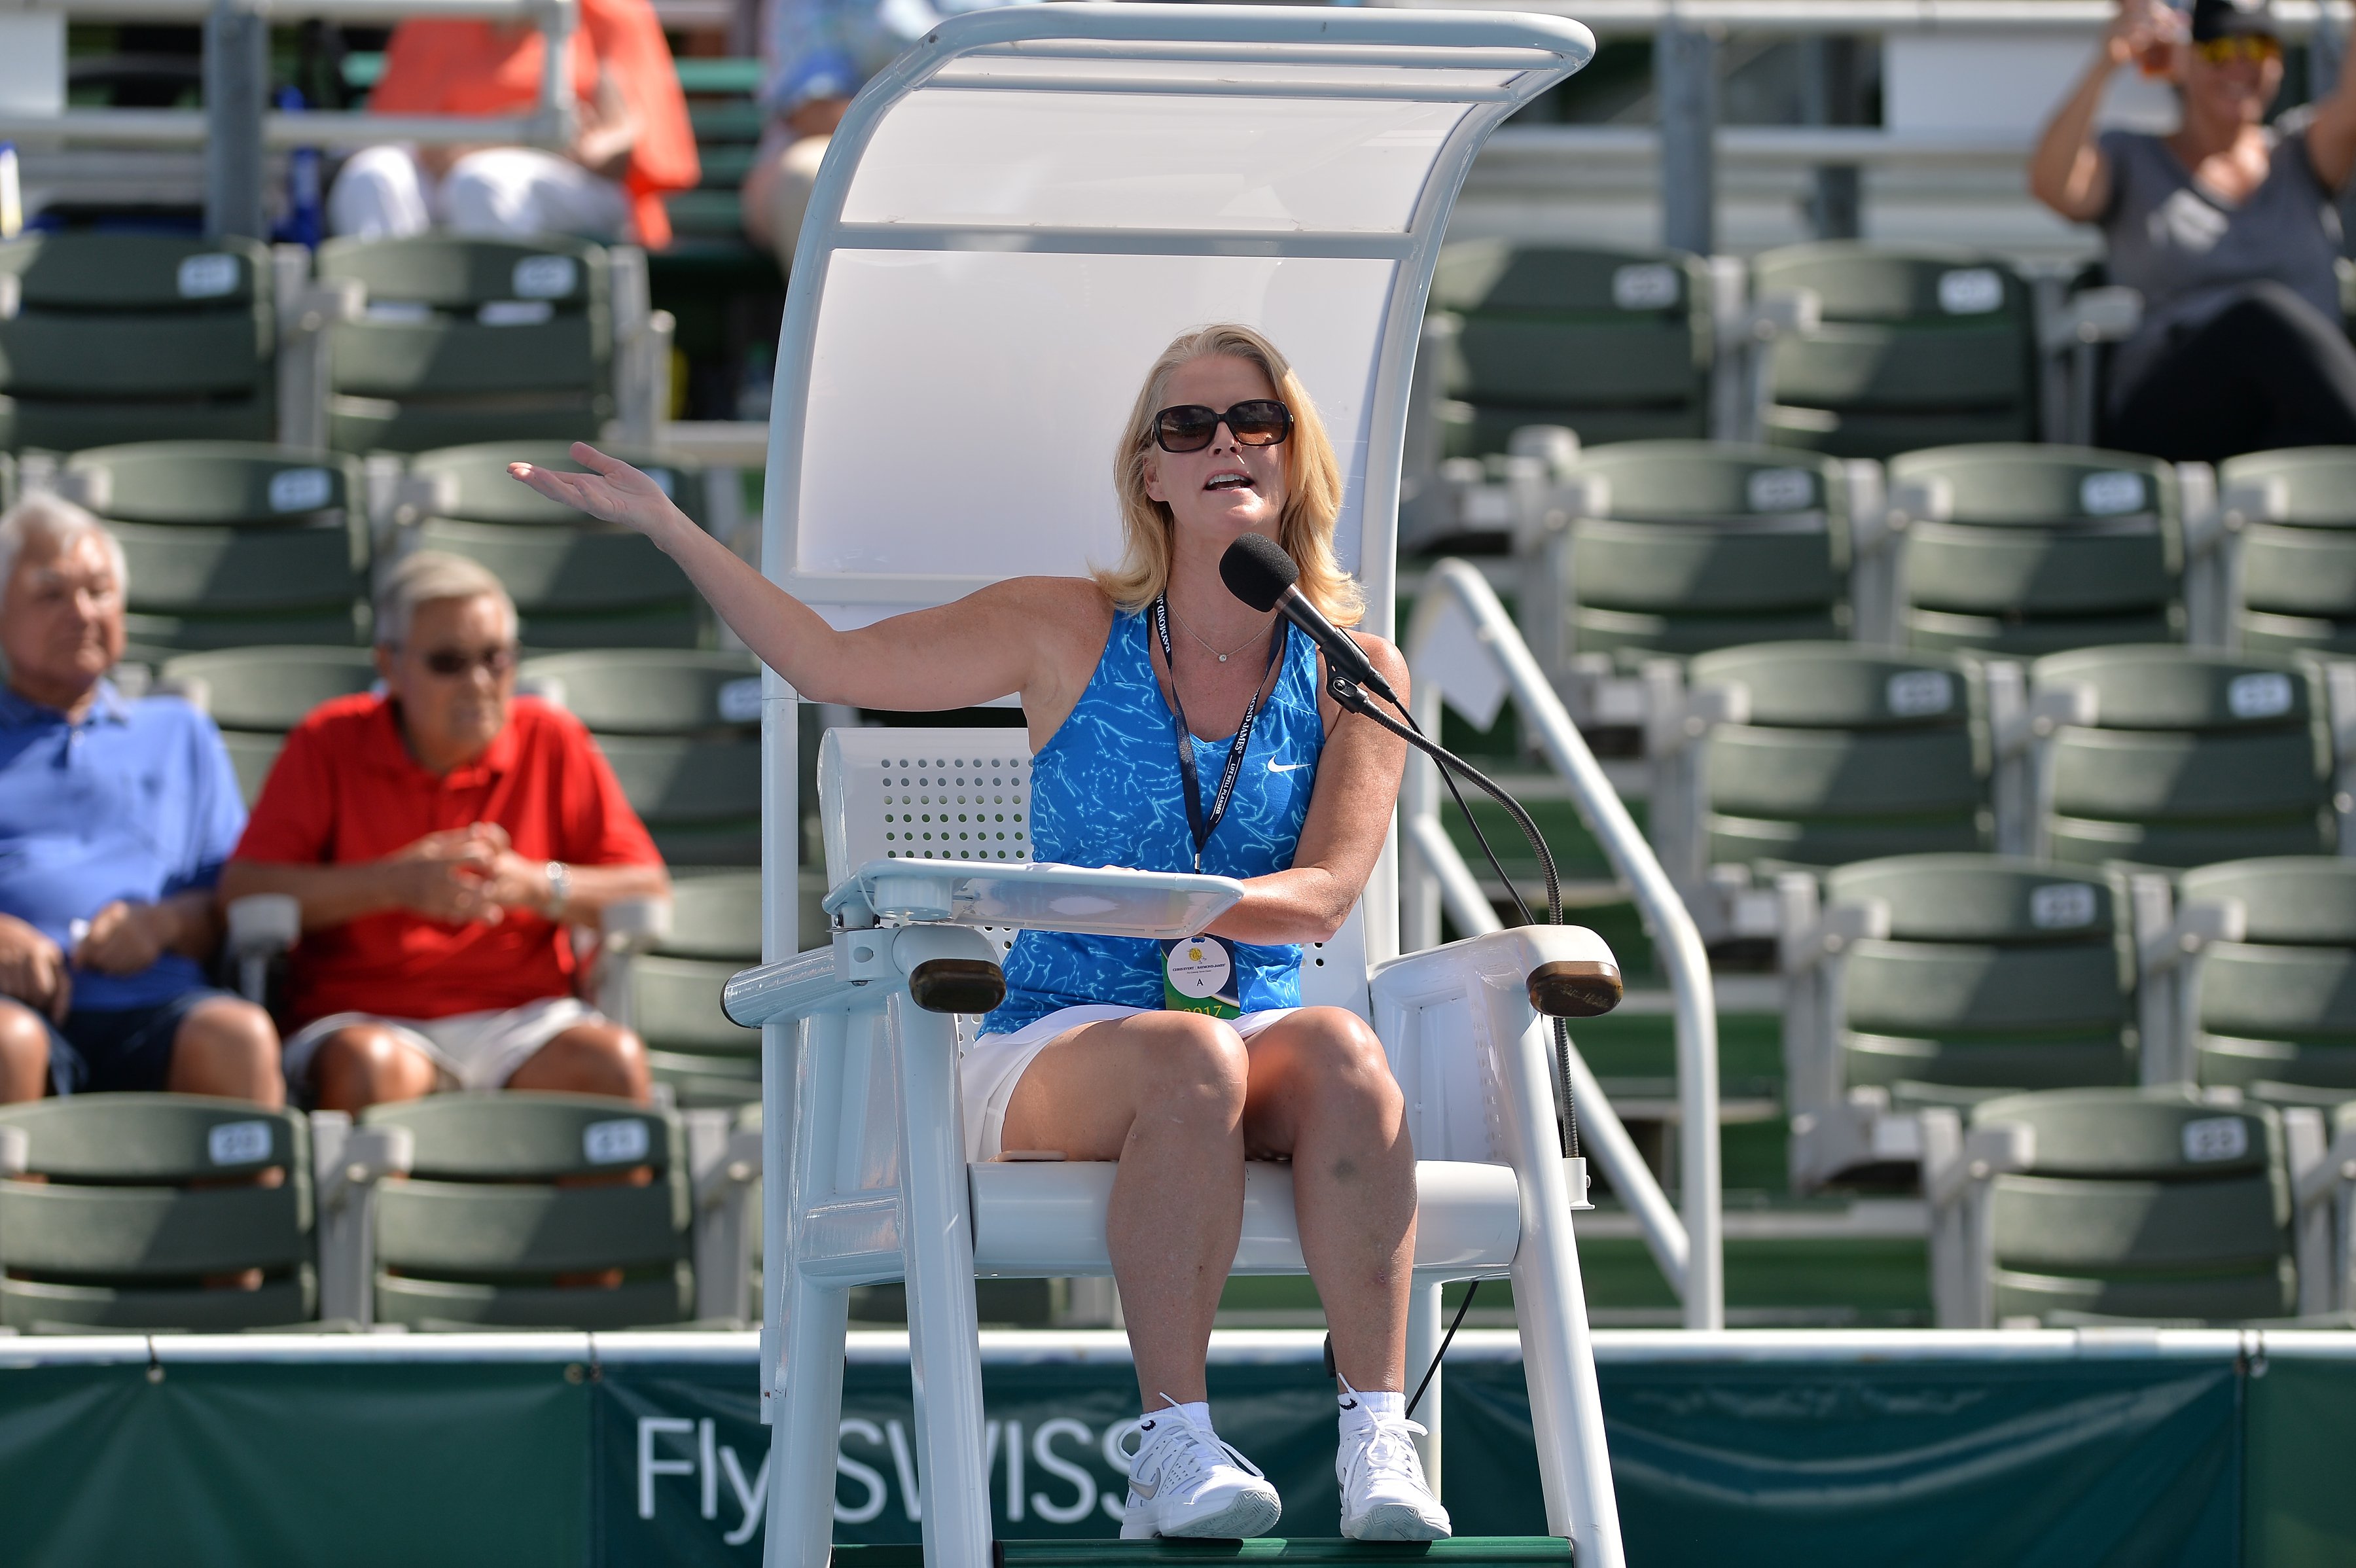 Maeve Quinlan as a chair umpire in the 28th Annual Chris Evert/Raymond James Pro-Celebrity Tennis Classic at Delray Beach Tennis Center in Delray Beach, Florida, on November 5, 2017. | Source: Getty Images